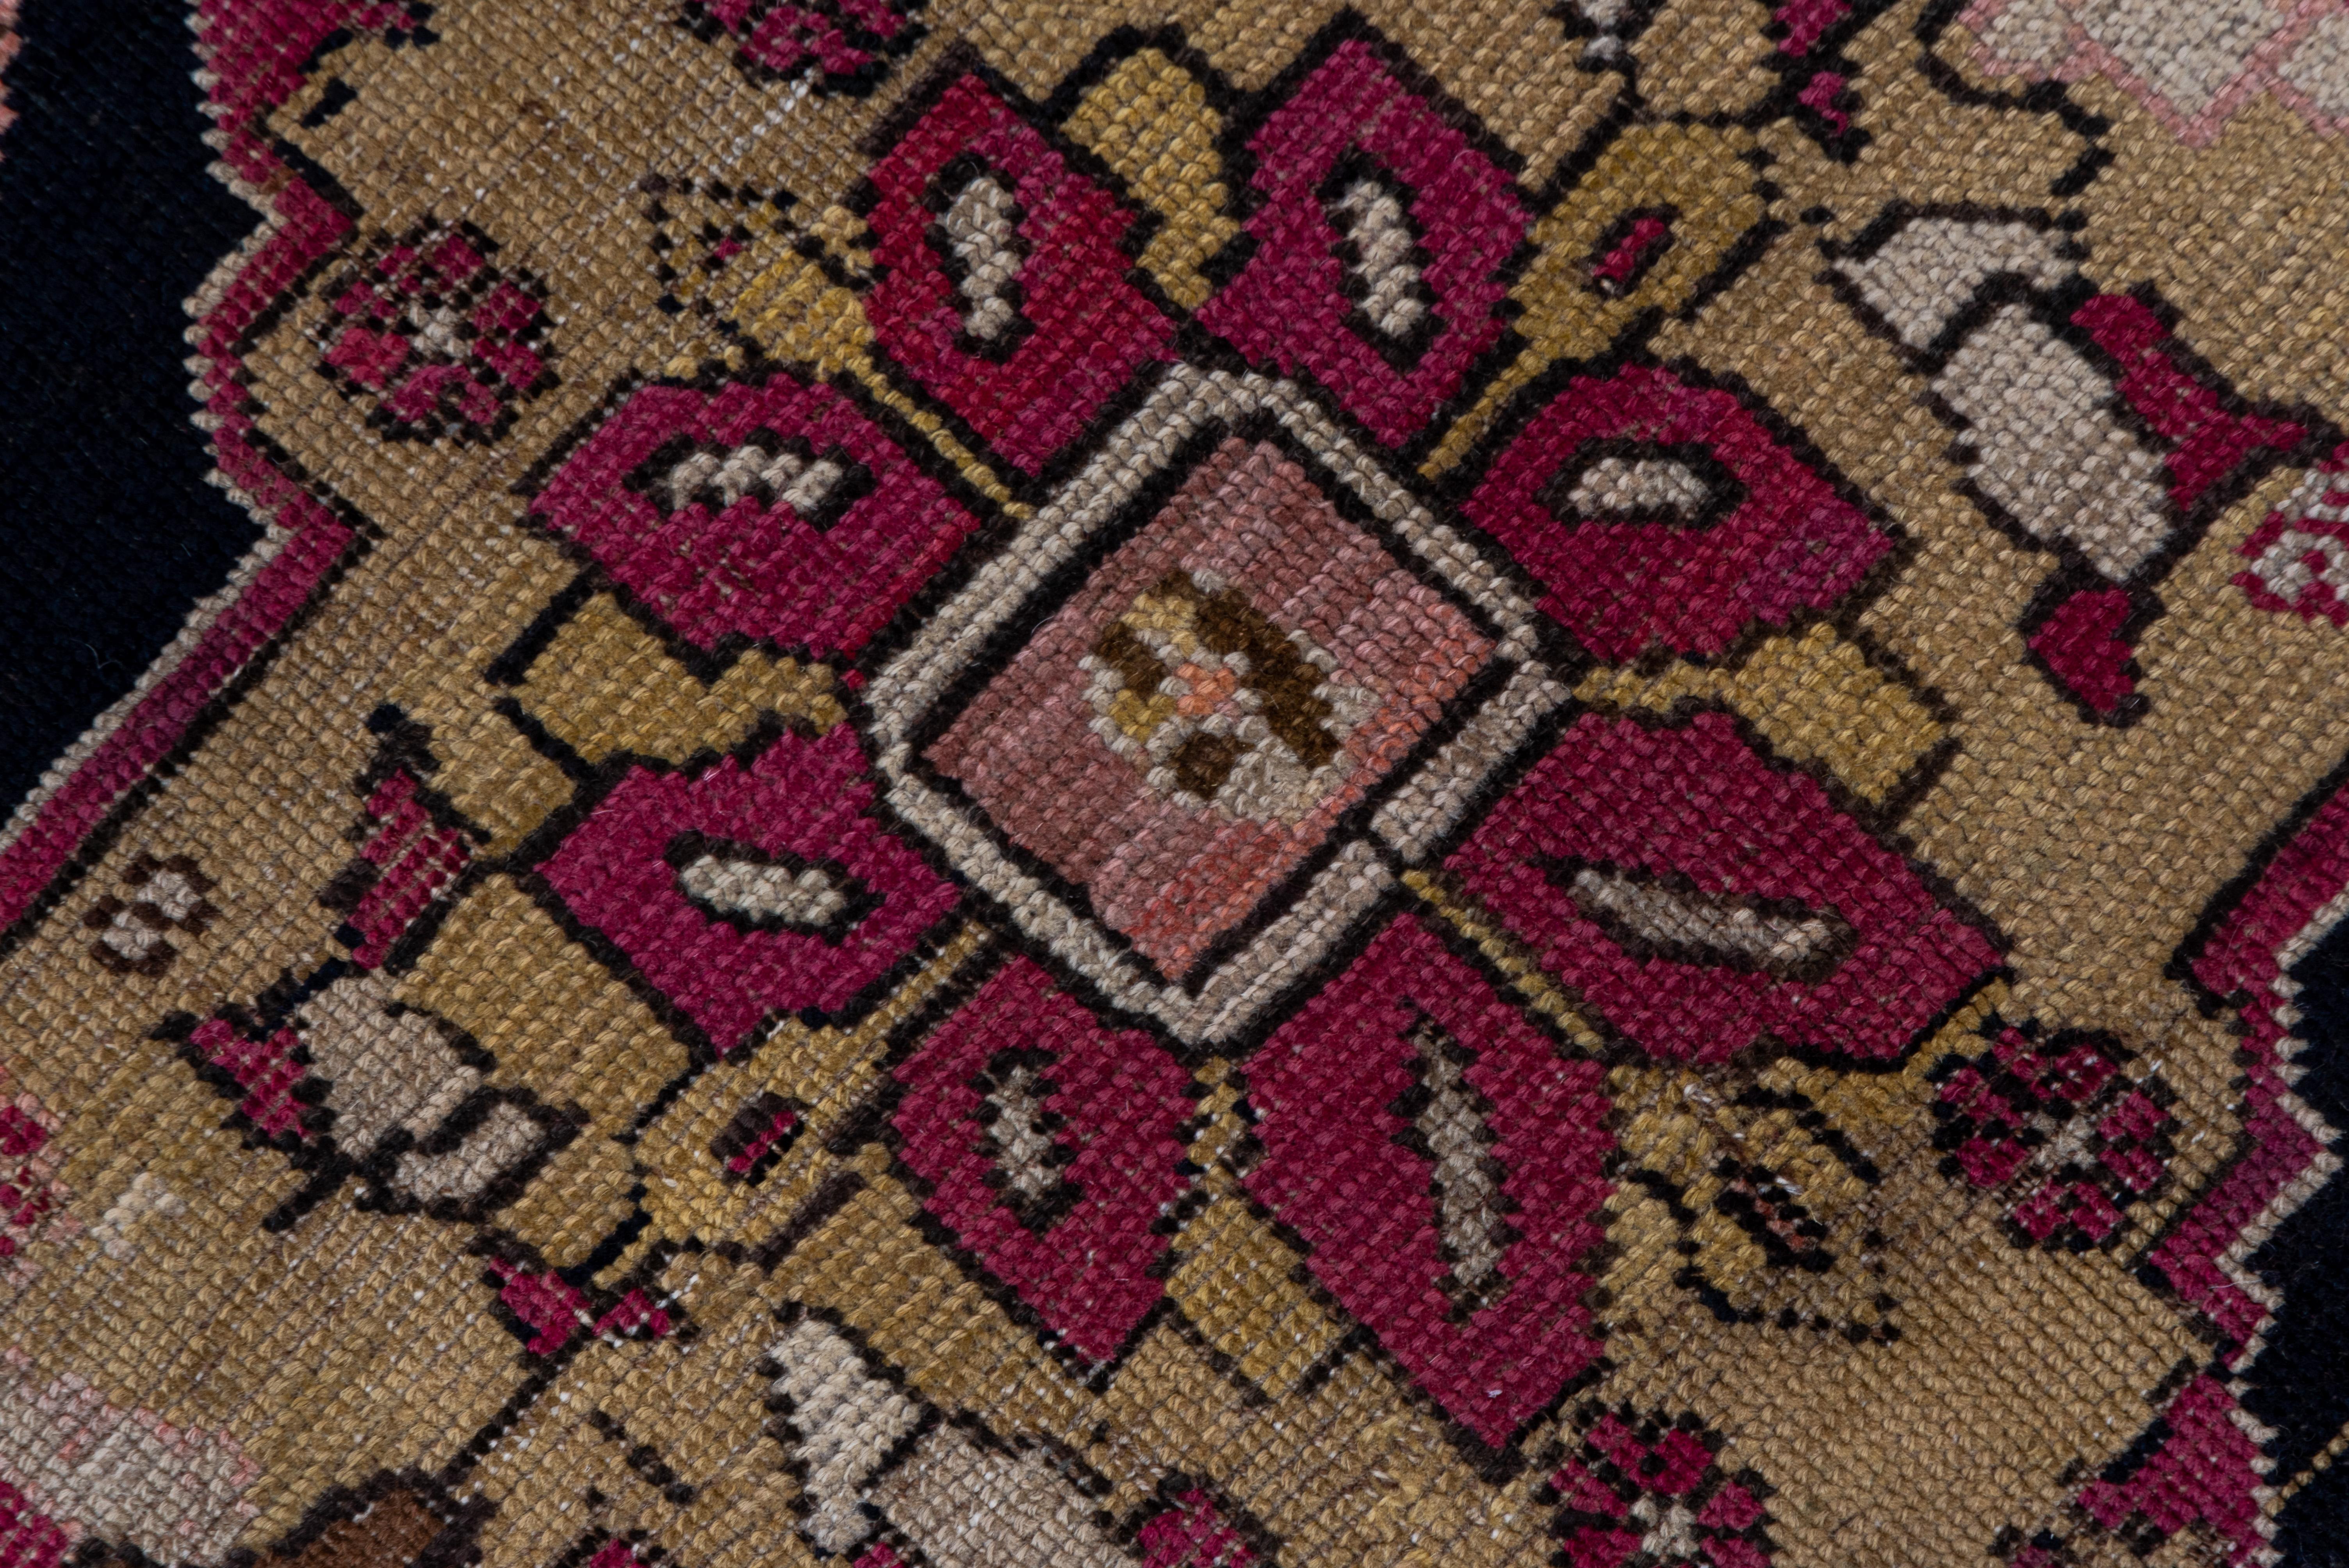 Antique Caucasian Karabagh Gallery Rug, Navy and Pink Field, Raspberry Borders In Good Condition For Sale In New York, NY